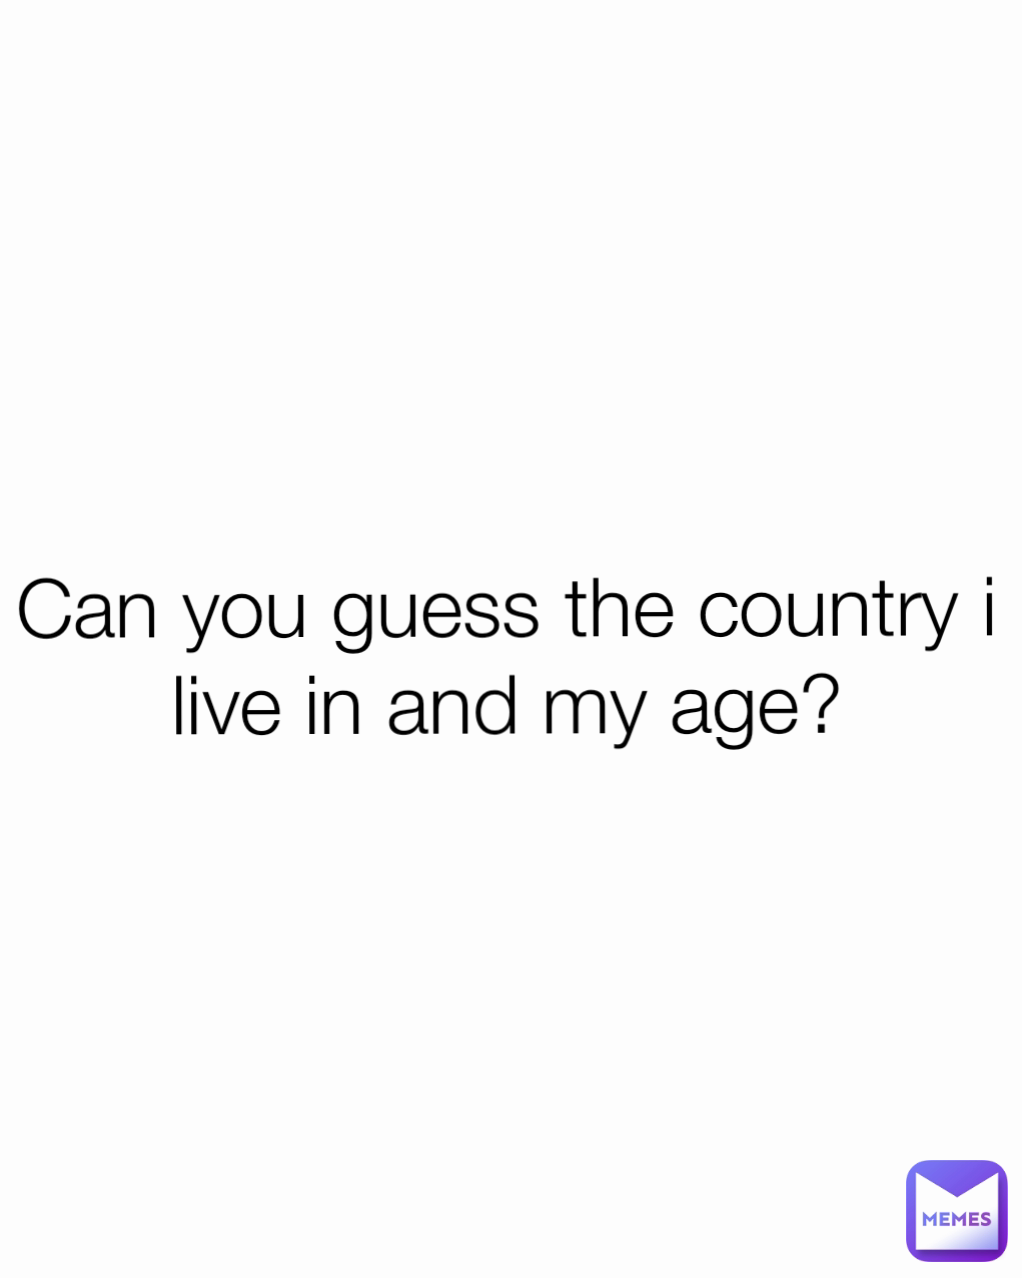 Can you guess the country i live in and my age?